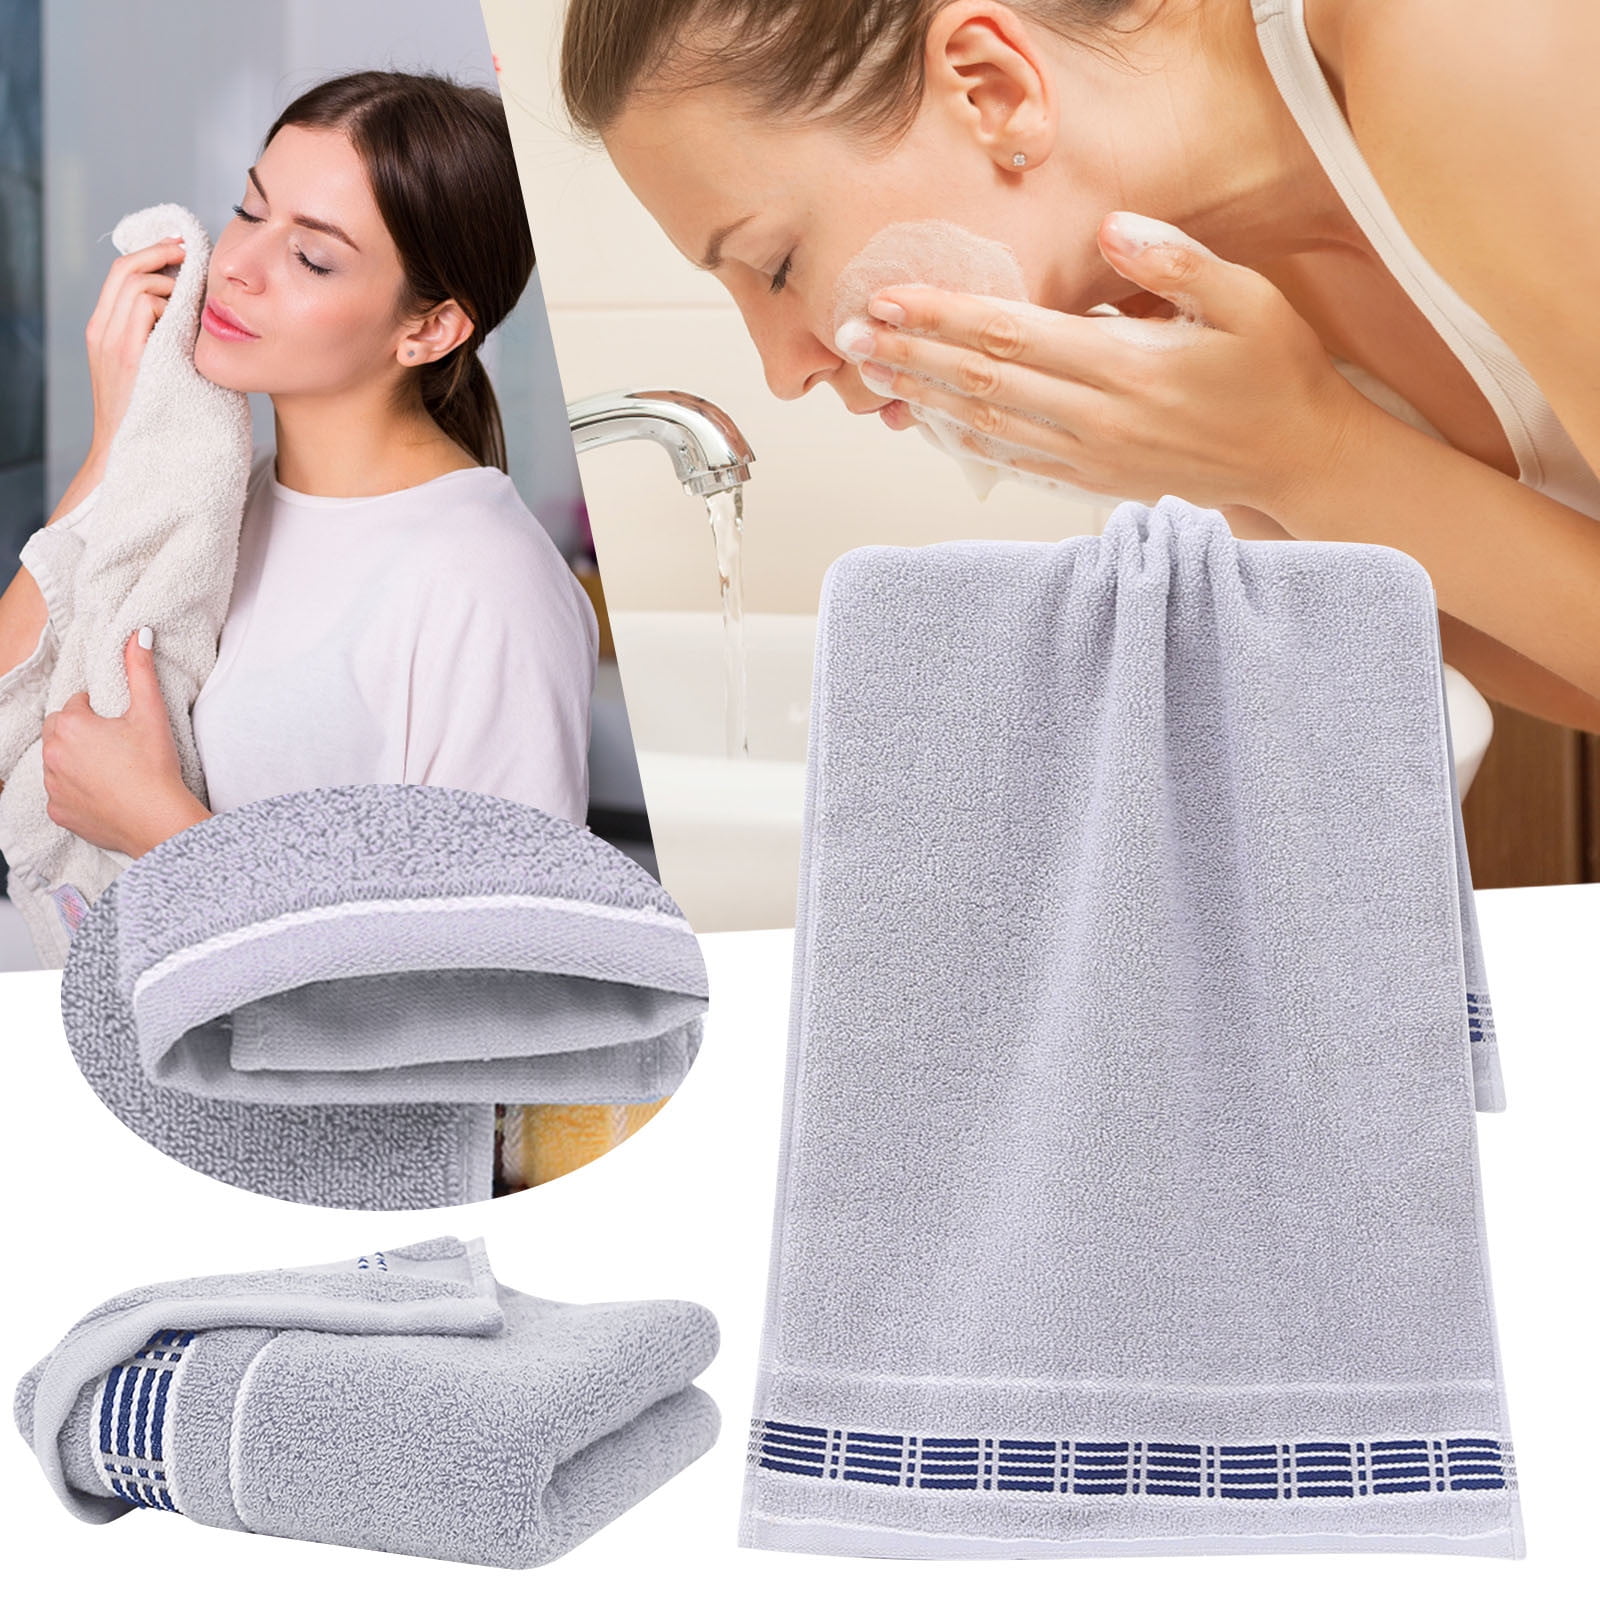 Wholesale Spa Towels in NYC & NJ